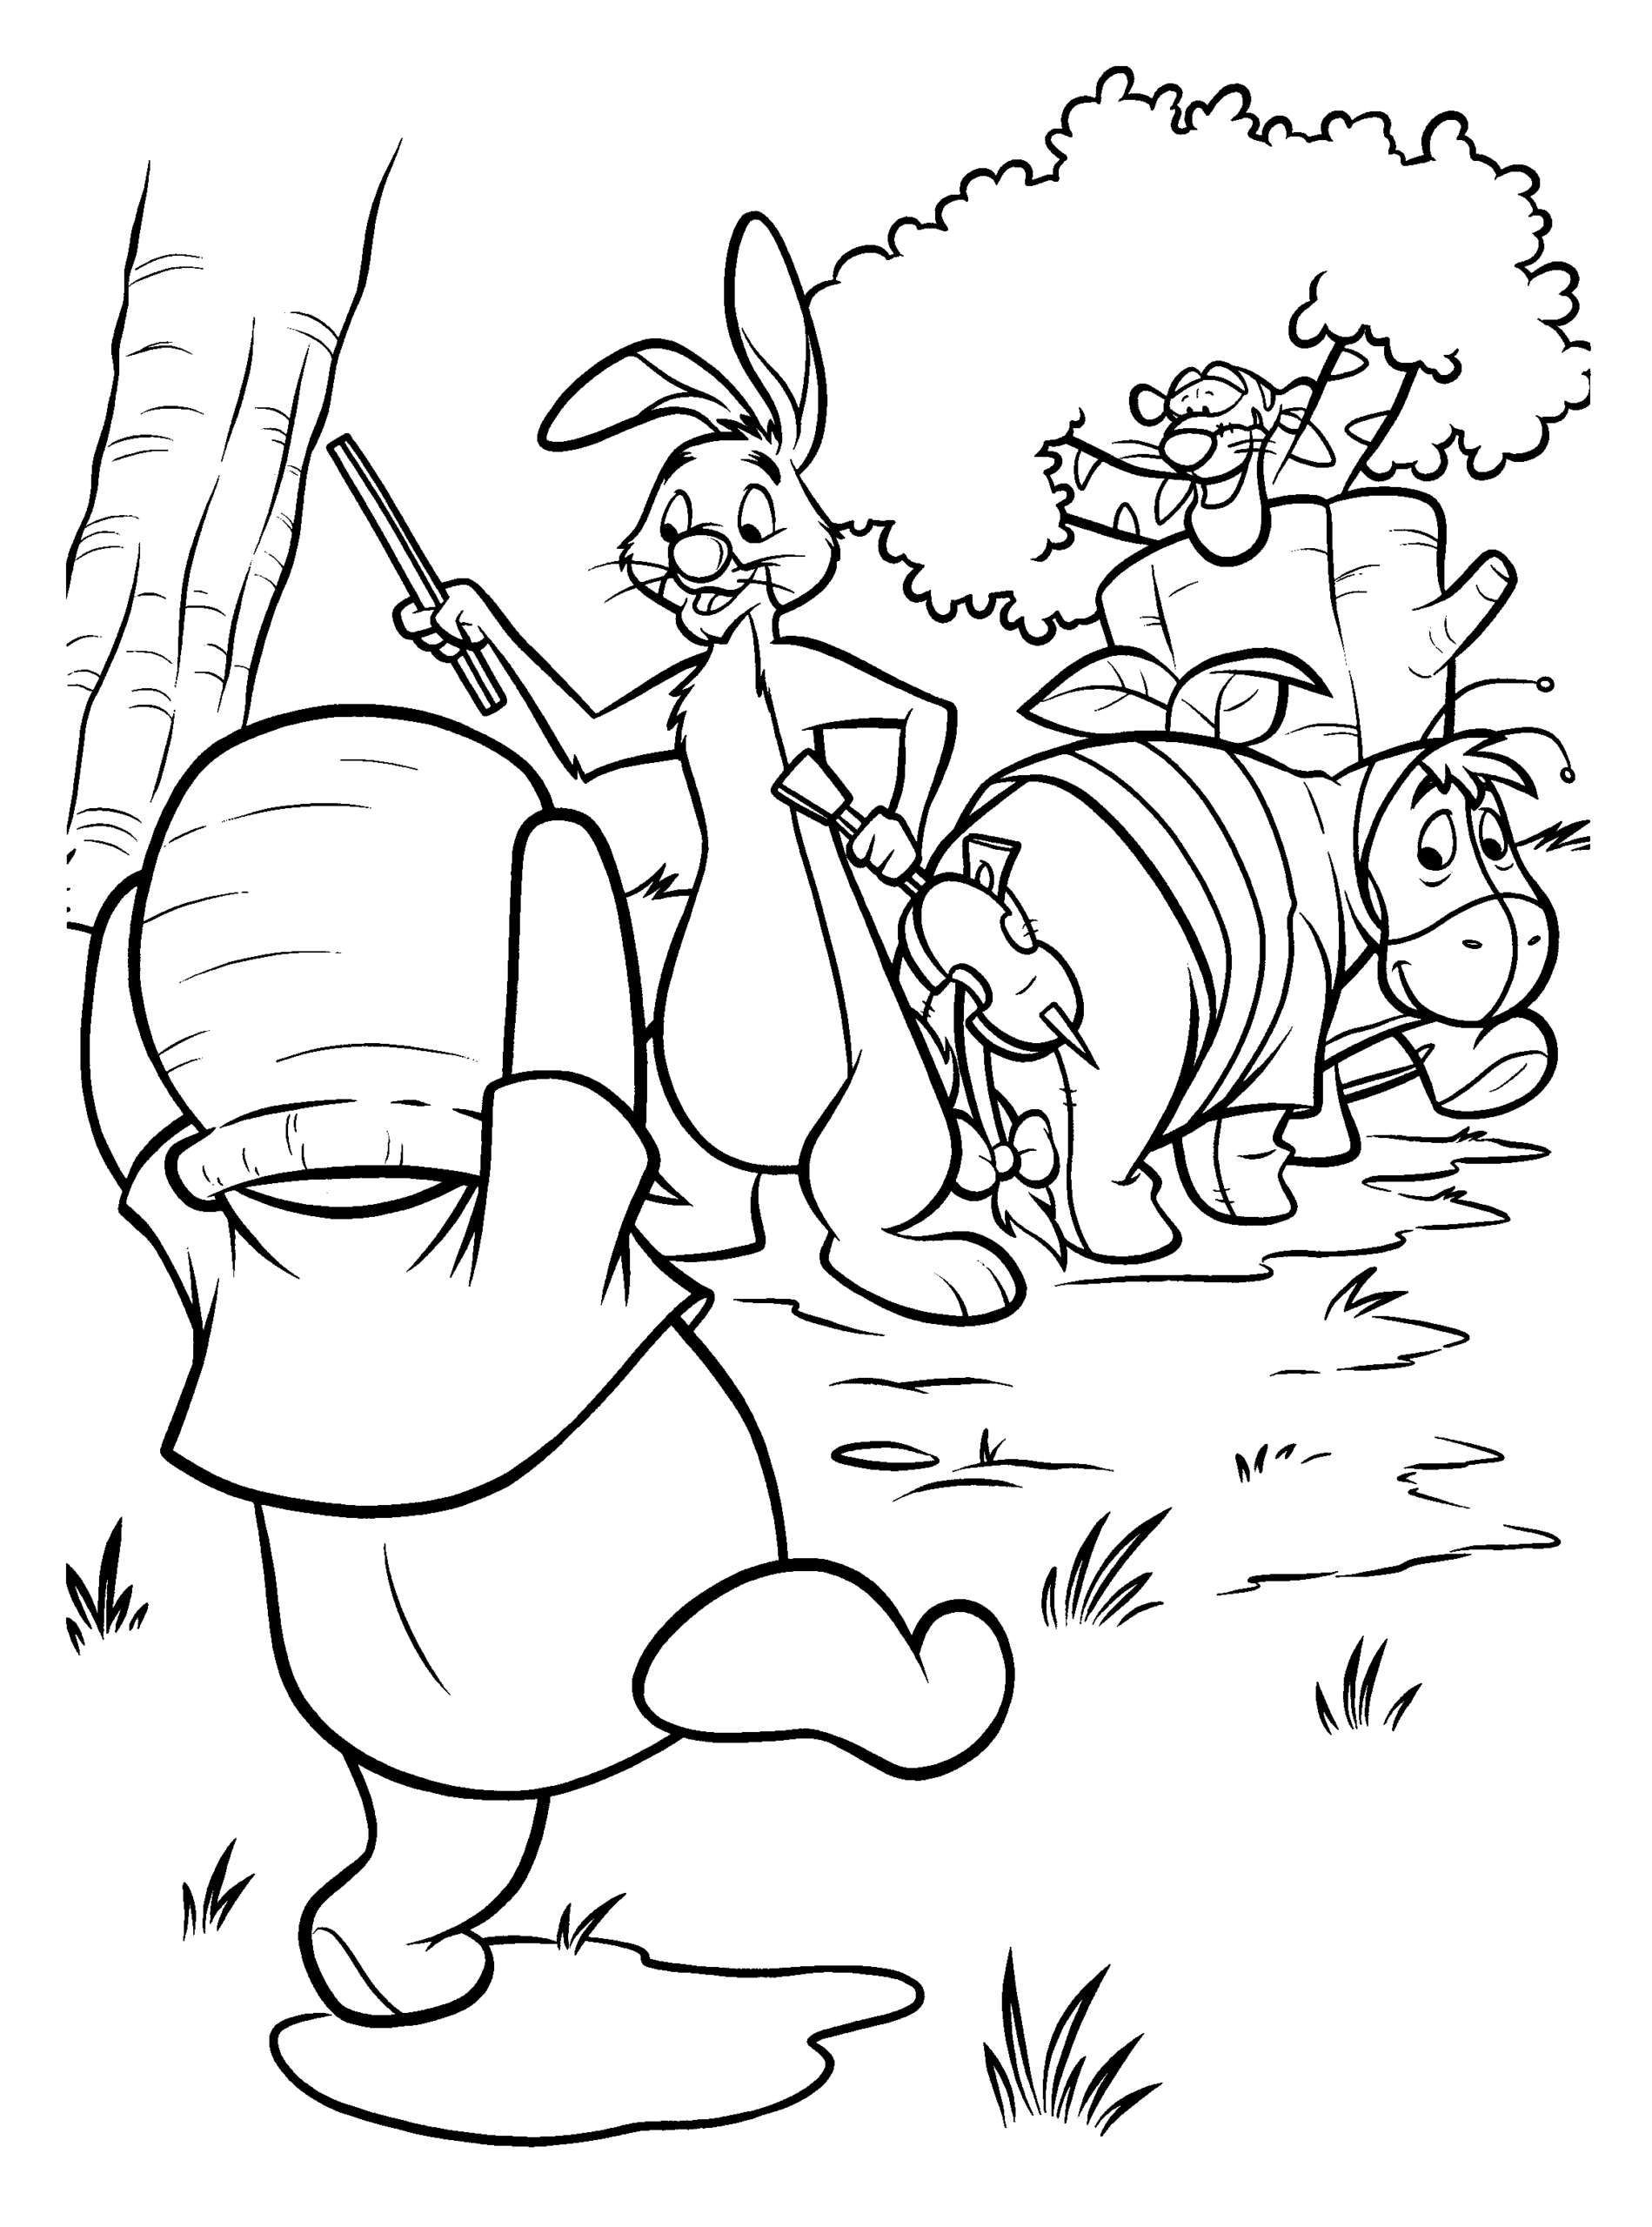 Winnie the Pooh Coloring Pages Cartoons winnie the pooh 2 Printable 2020 7116 Coloring4free